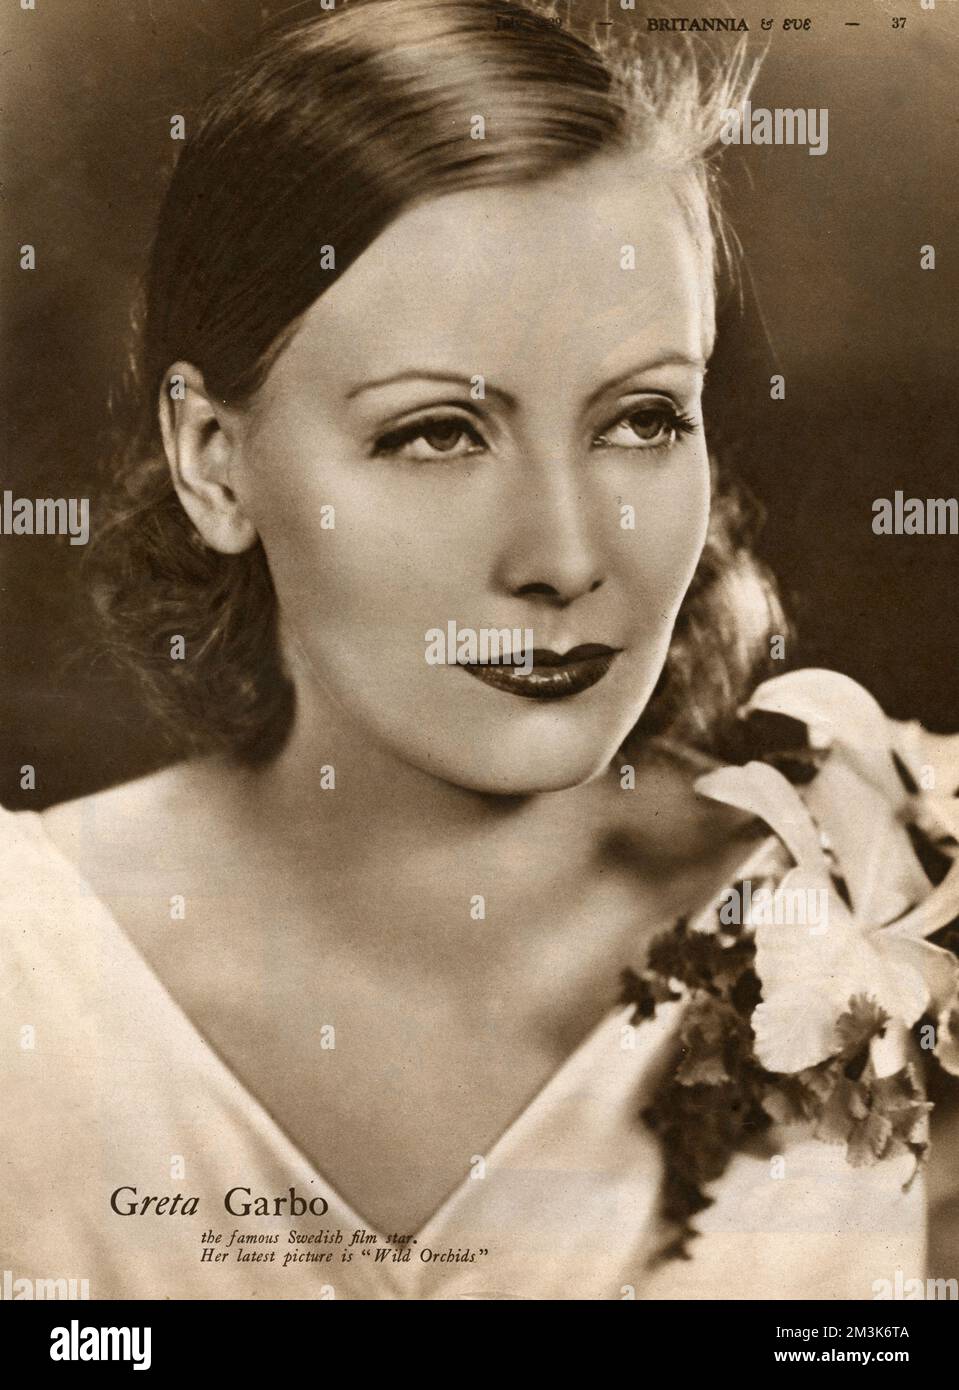 Greta Garbo (1905 - 1990), promoting her film 'Wild Orchids.' Greta Garbo was born in Stockholm and was 'spotted' whilst studying at the Royal Theatre Dramatic School by the Swedish director Mauritz Stiller. Her first Hollywood film was 'The Temptress' 1926. Amongst her other successes are, 'Queen Christie' (1930), 'Anna Karenina' (1935) and 'Ninotchka' (1939). She retired from films in 1941, after receiving poor reviews for 'Two-Faced Woman.' She spent the rest of her life living as a recluse in New York. Stock Photo